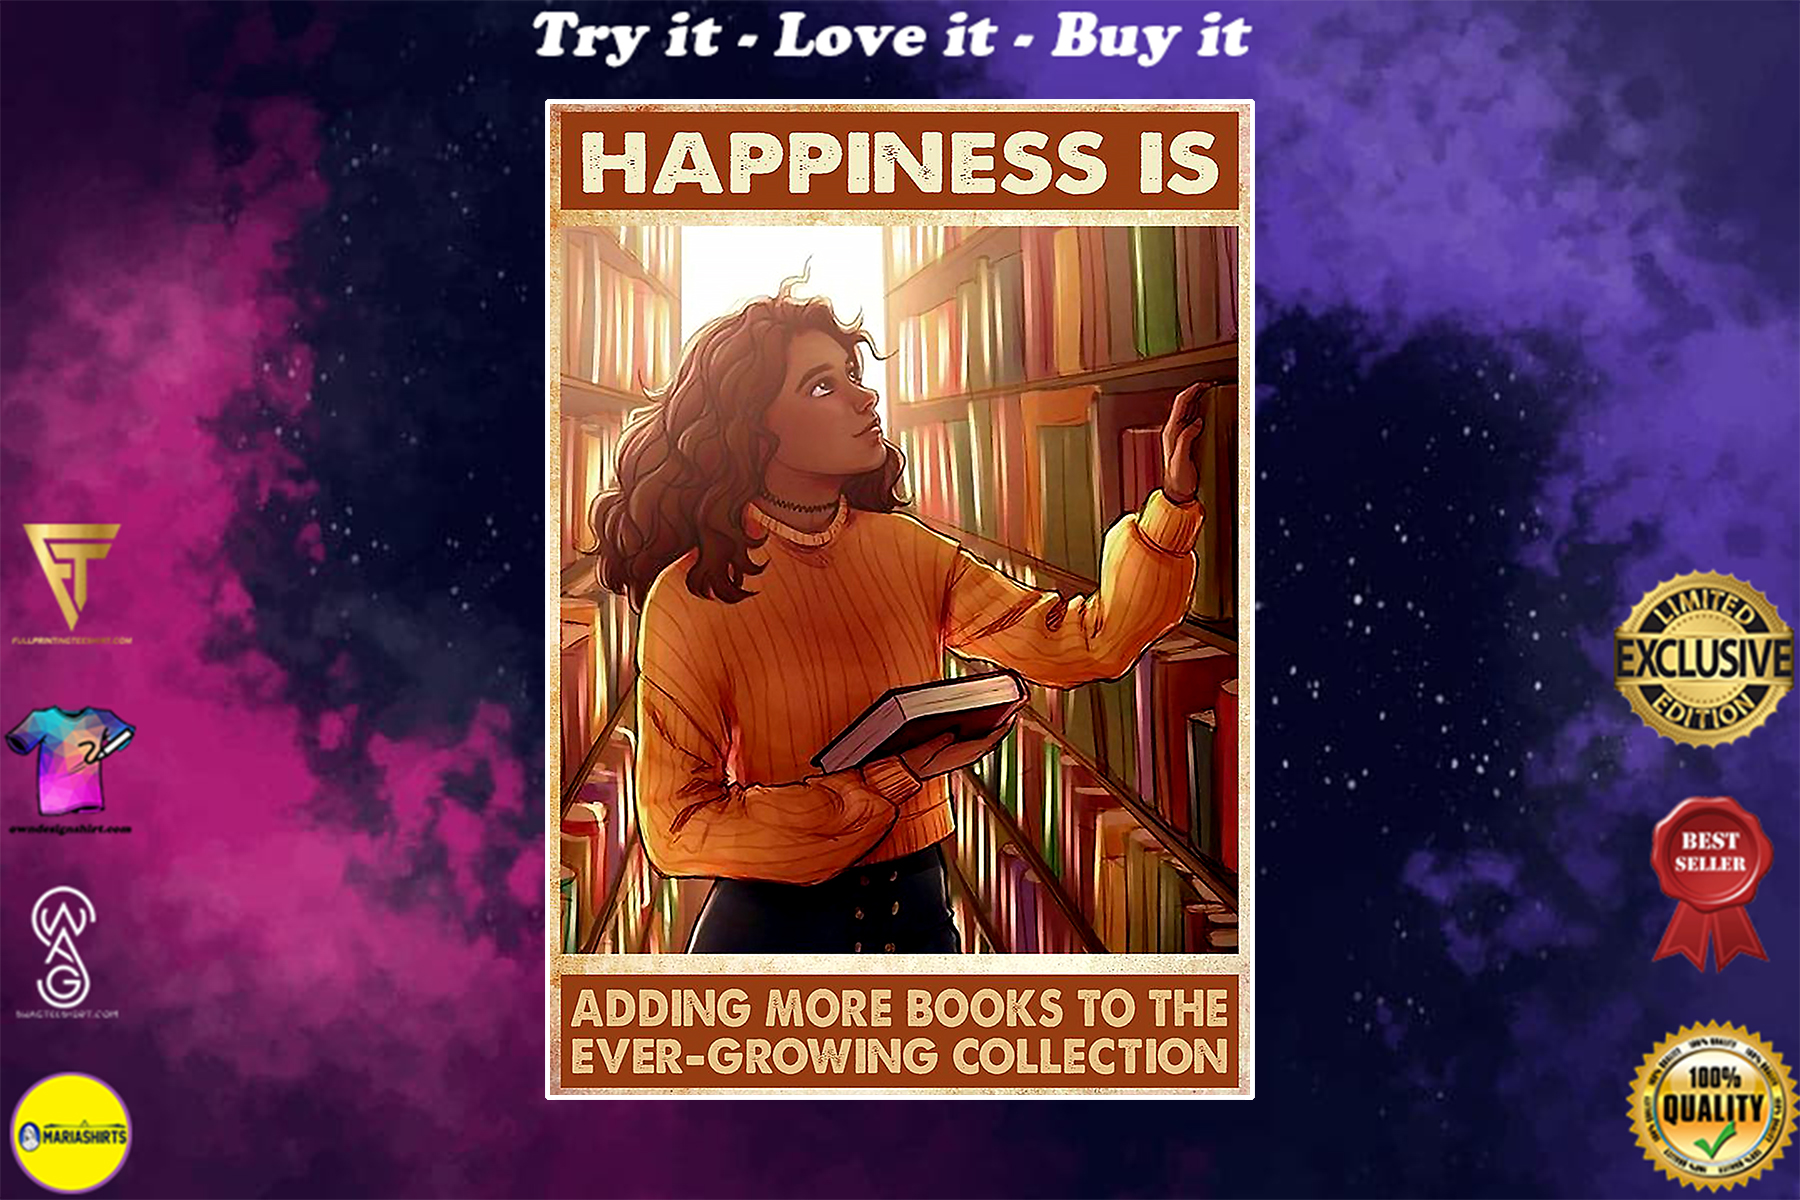 vintage happiness is adding more books to the ever-growing collection poster poster